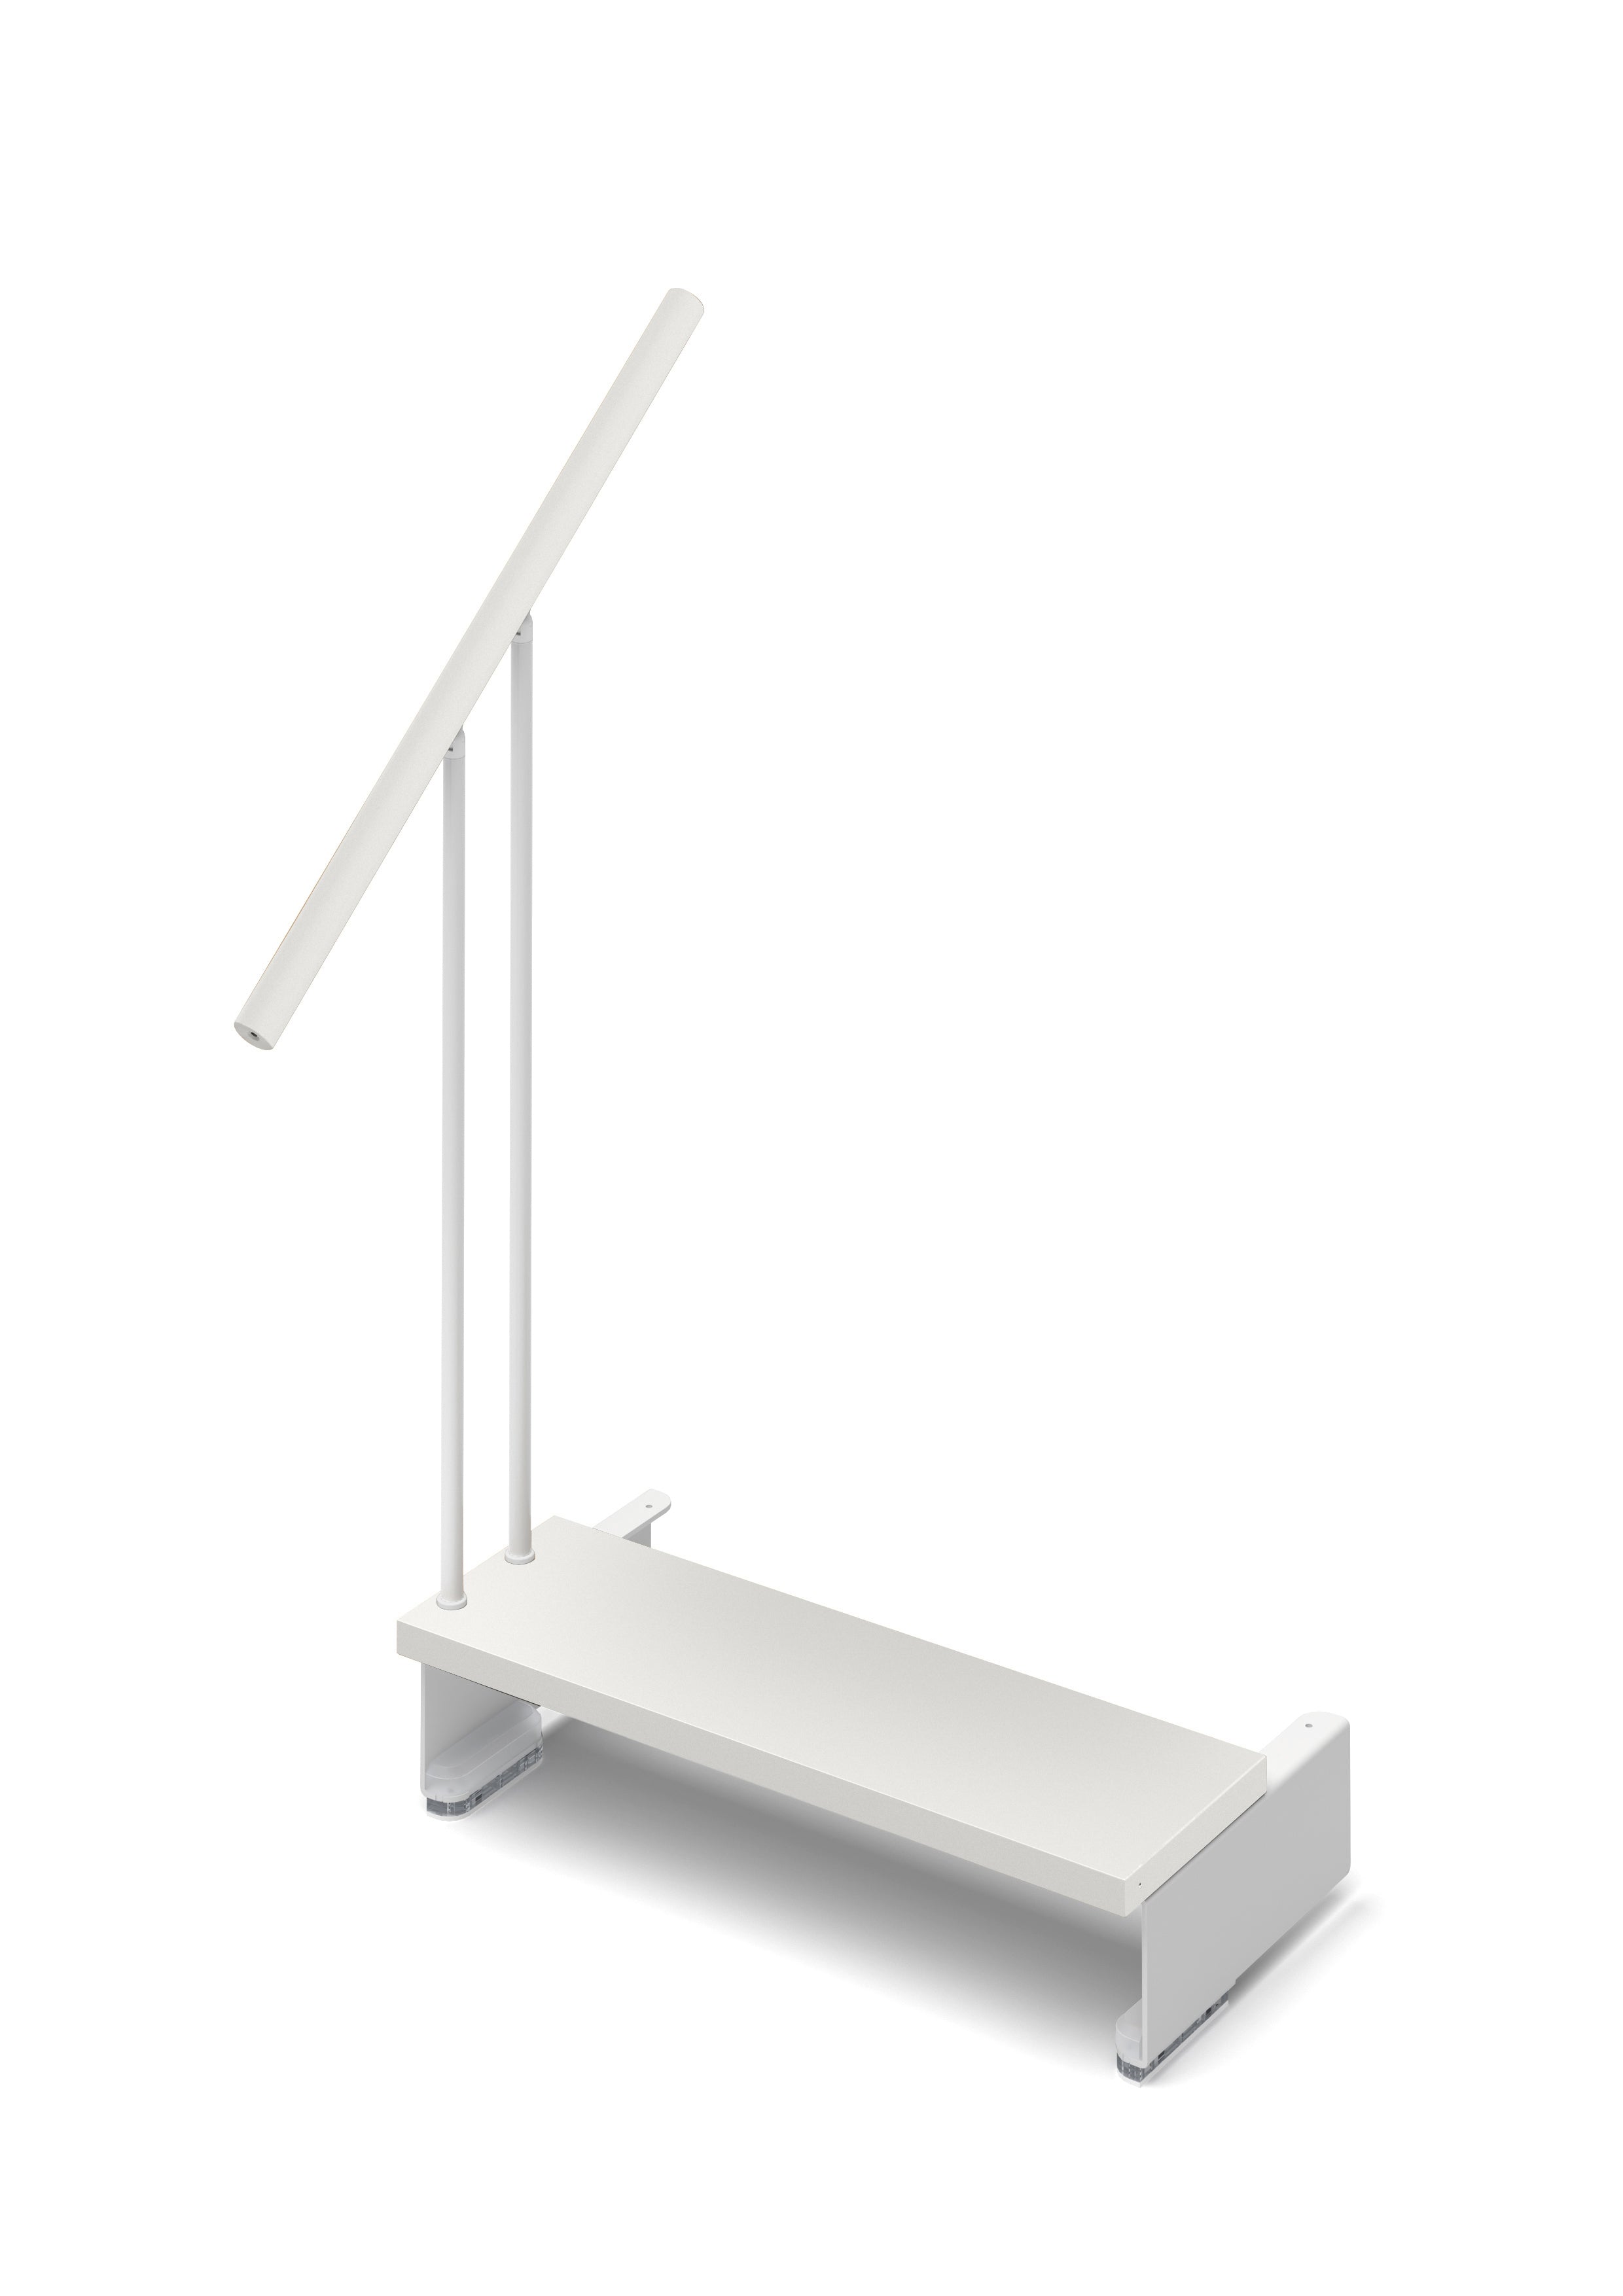 Additional step Adapta 94cm (with structure and railing) - Lacquered White 94